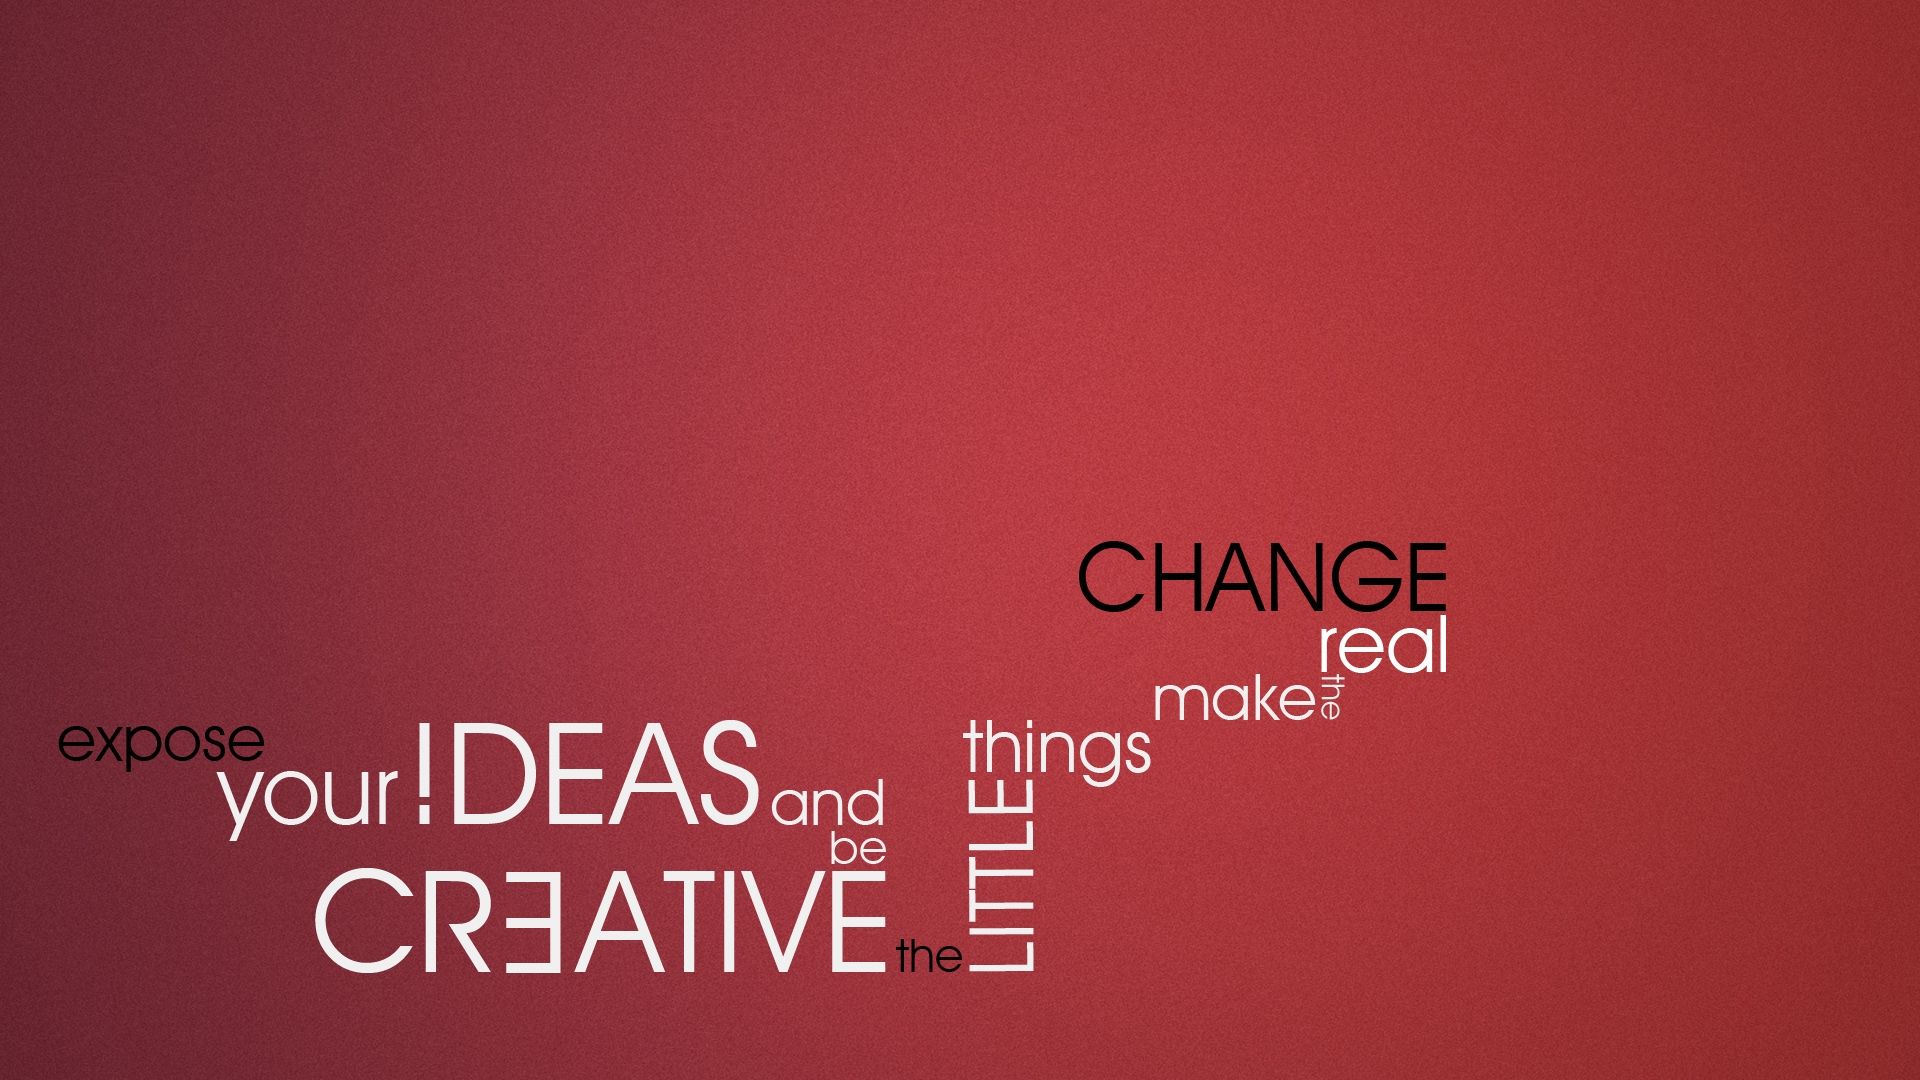 Free Laptop Backgrounds with Quotes about Change - HD ...